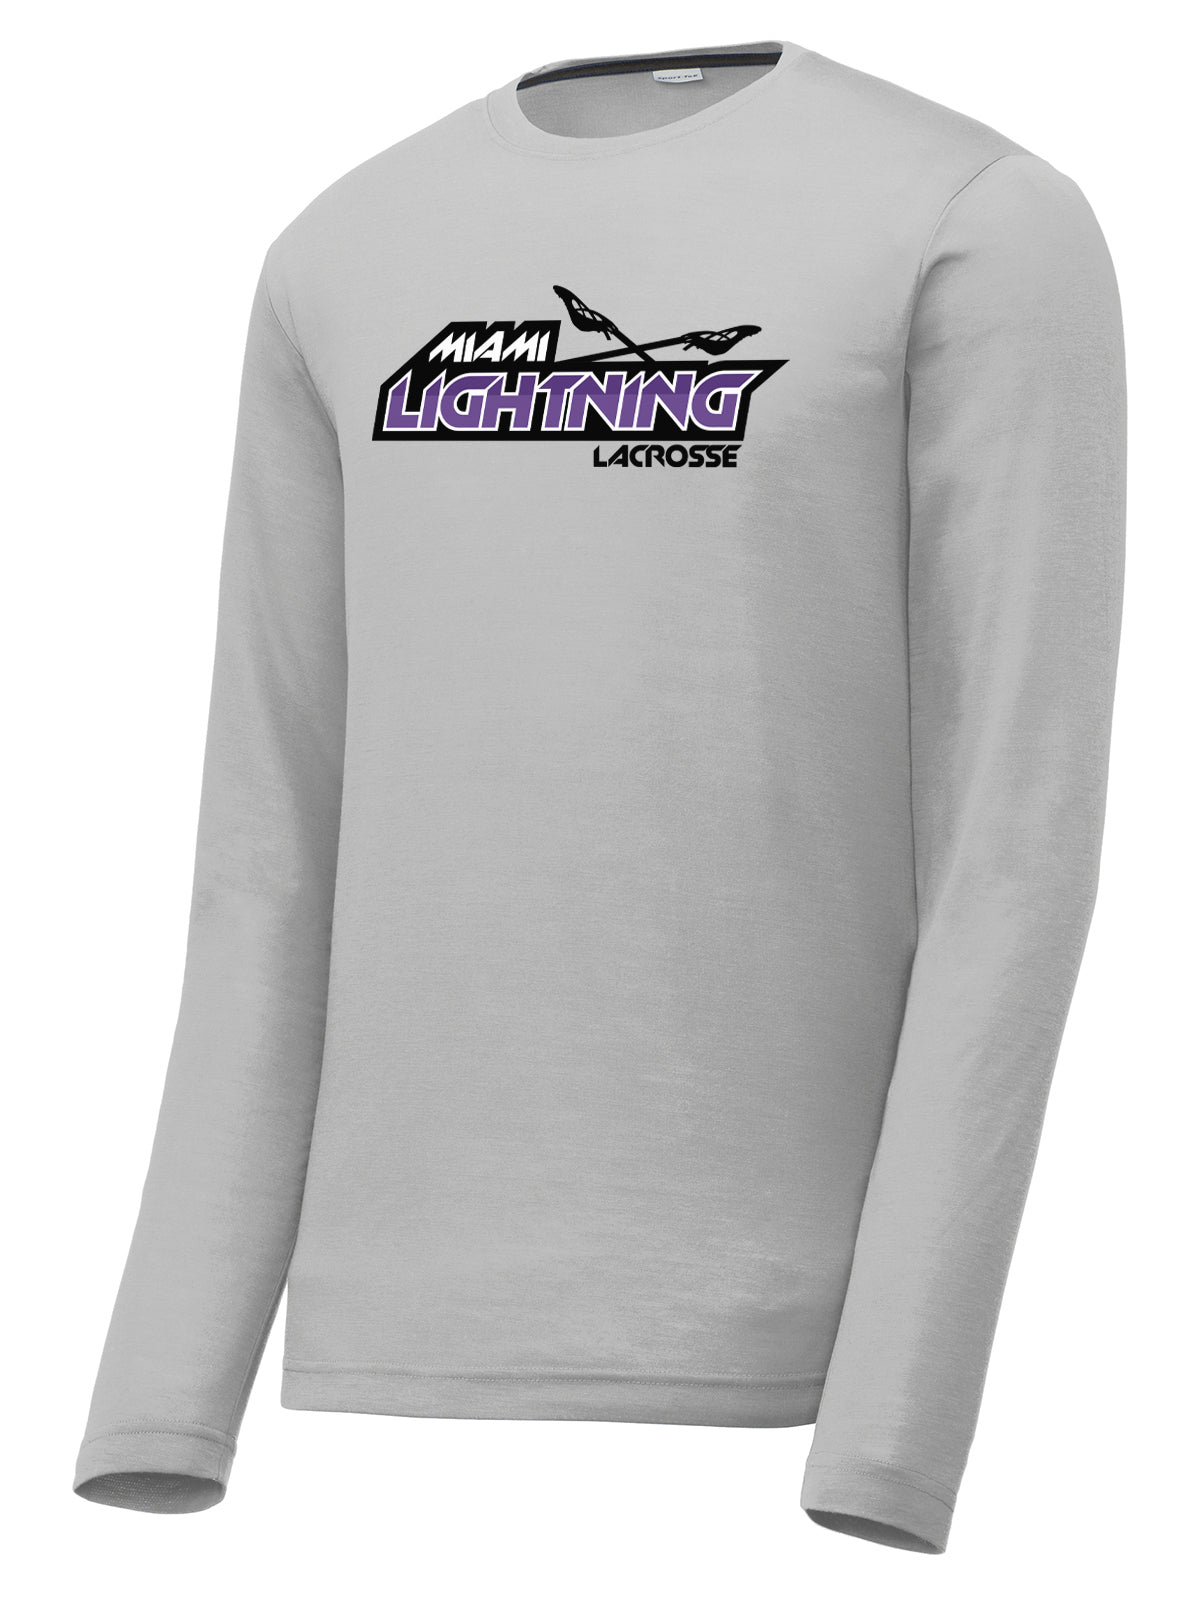 Miami Lightning Silver Long Sleeve CottonTouch Performance Shirt